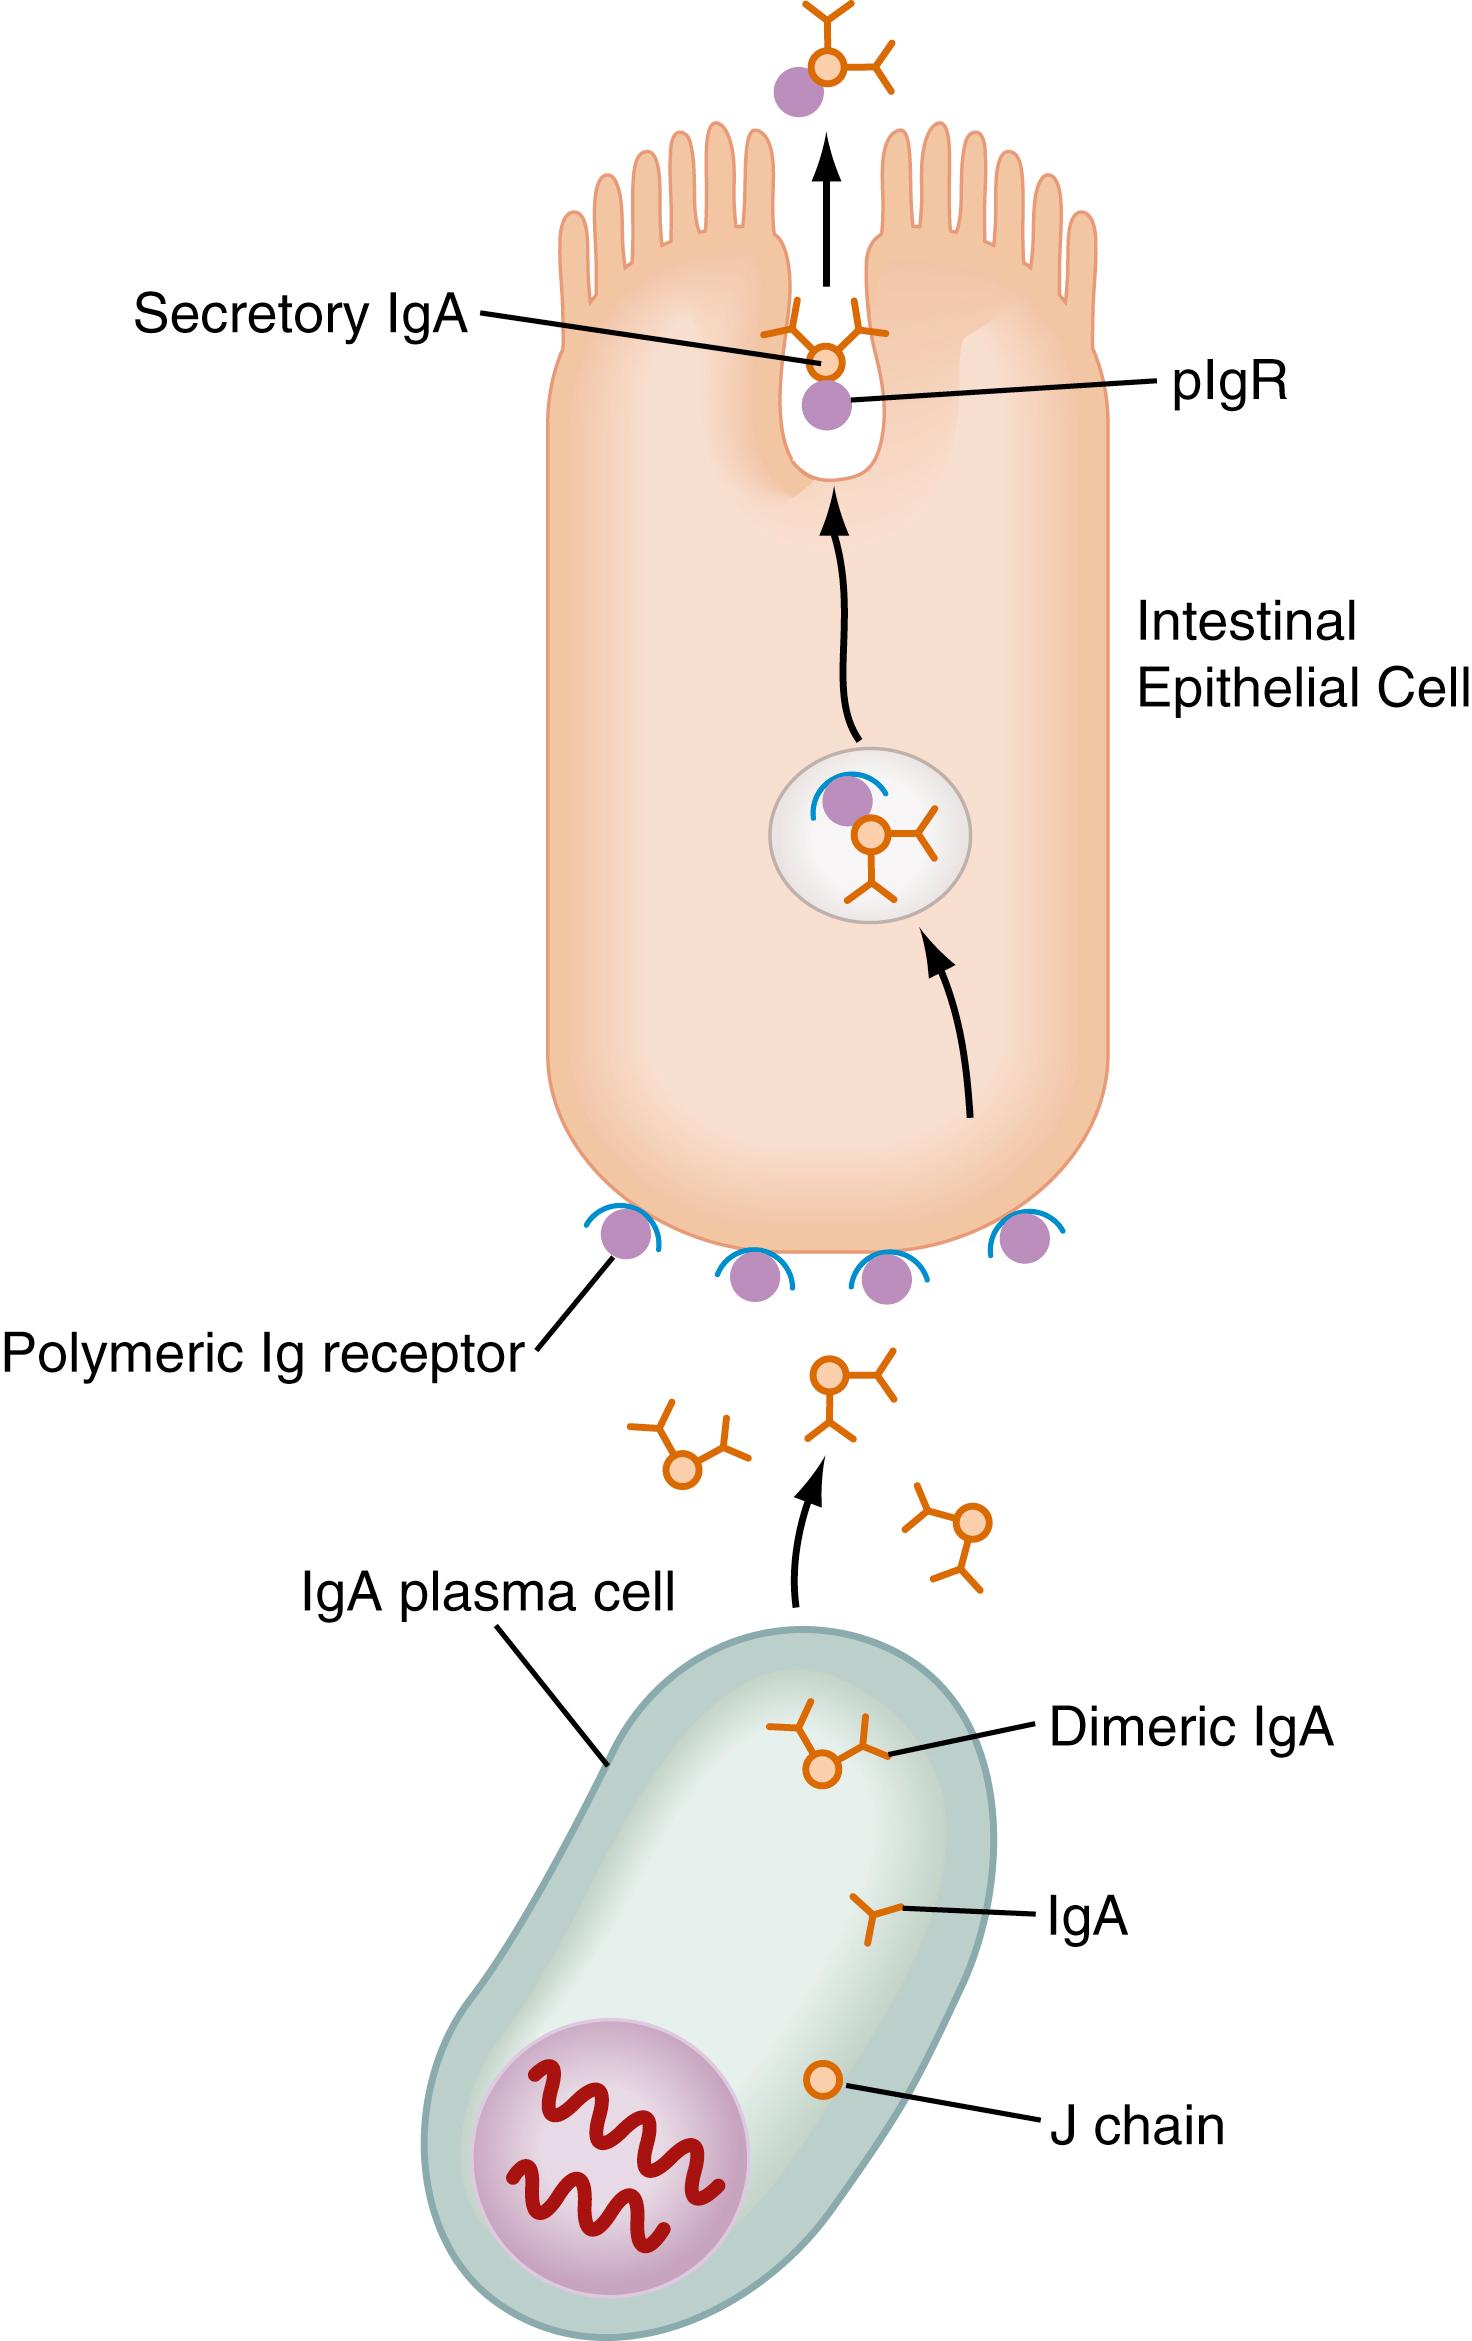 Fig. 2.3, Assembly and secretion of dimeric immunoglobulin A (IgA) . IgA and J chain produced by IgA-committed plasma cells (bottom) dimerize to form polymeric IgA, which covalently binds to membrane-bound polymeric Ig receptor produced by intestinal epithelial cells (top) . This complex is internalized, transported to the apical surface of epithelial cell, and secreted into the lumen. pIgR, polymeric immunoglobulin receptor.